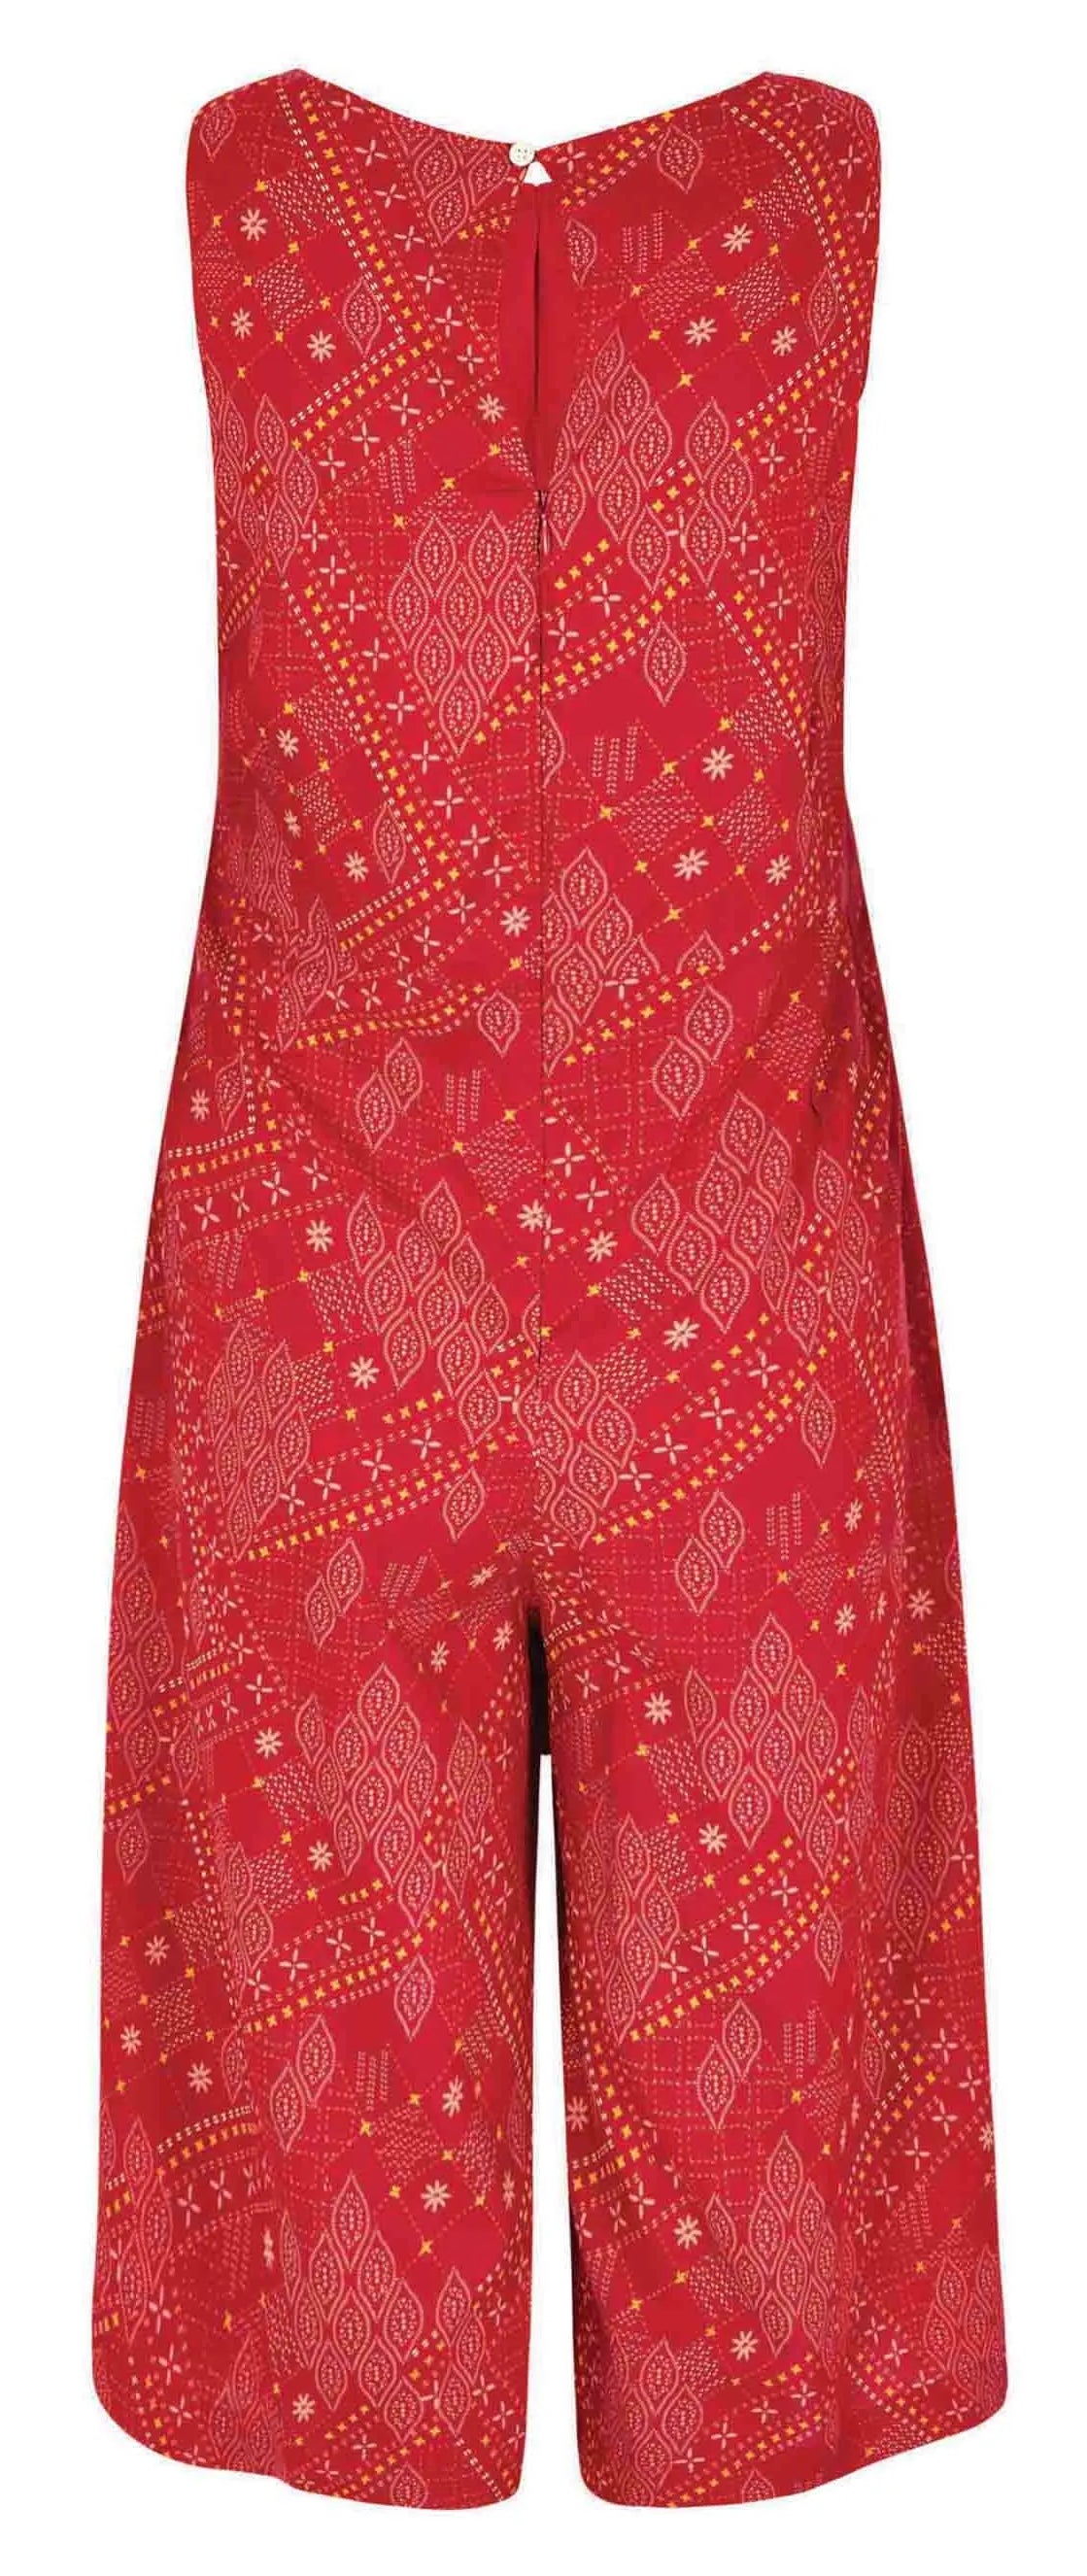 Women's sleeveless, wide legged viscose Nalani jumpsuit from Weird Fish in Chilli Red with a Moroccan style print.